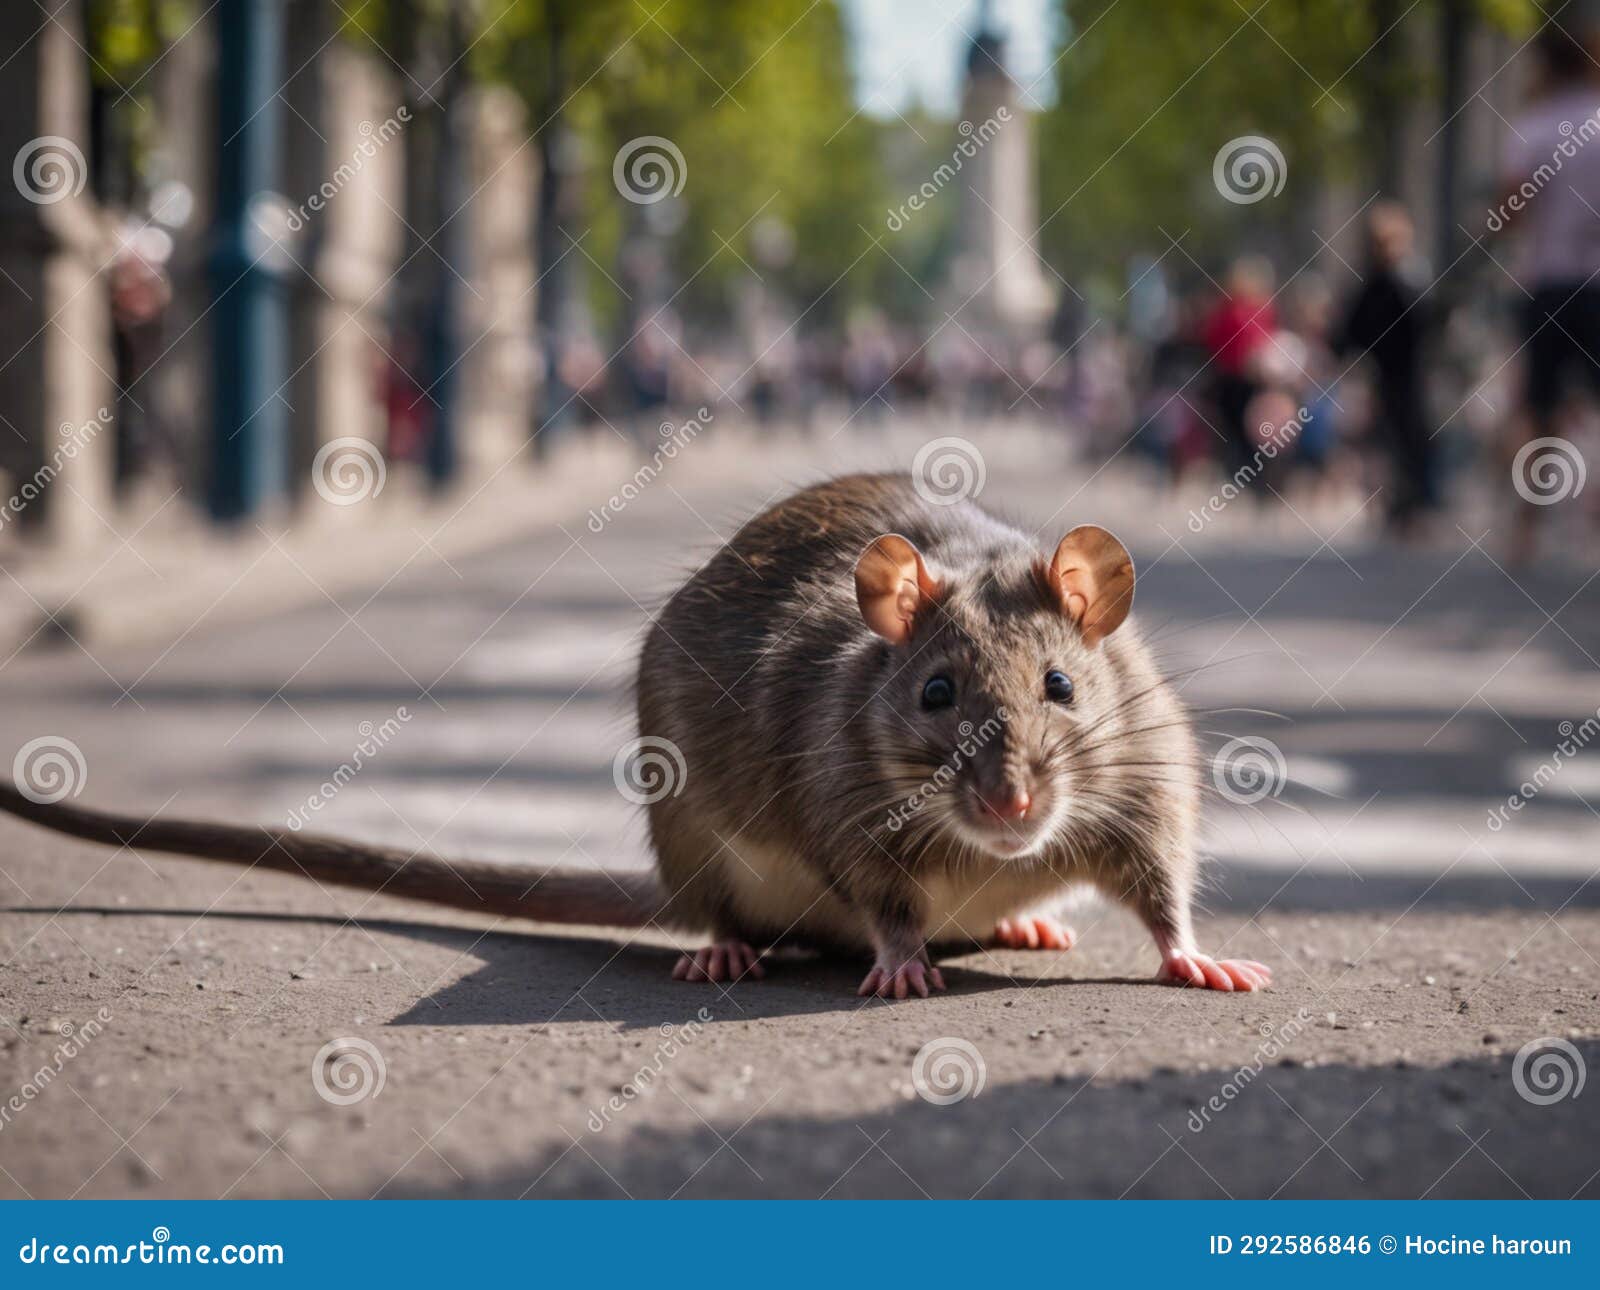 garbage and rats in the streets of paris